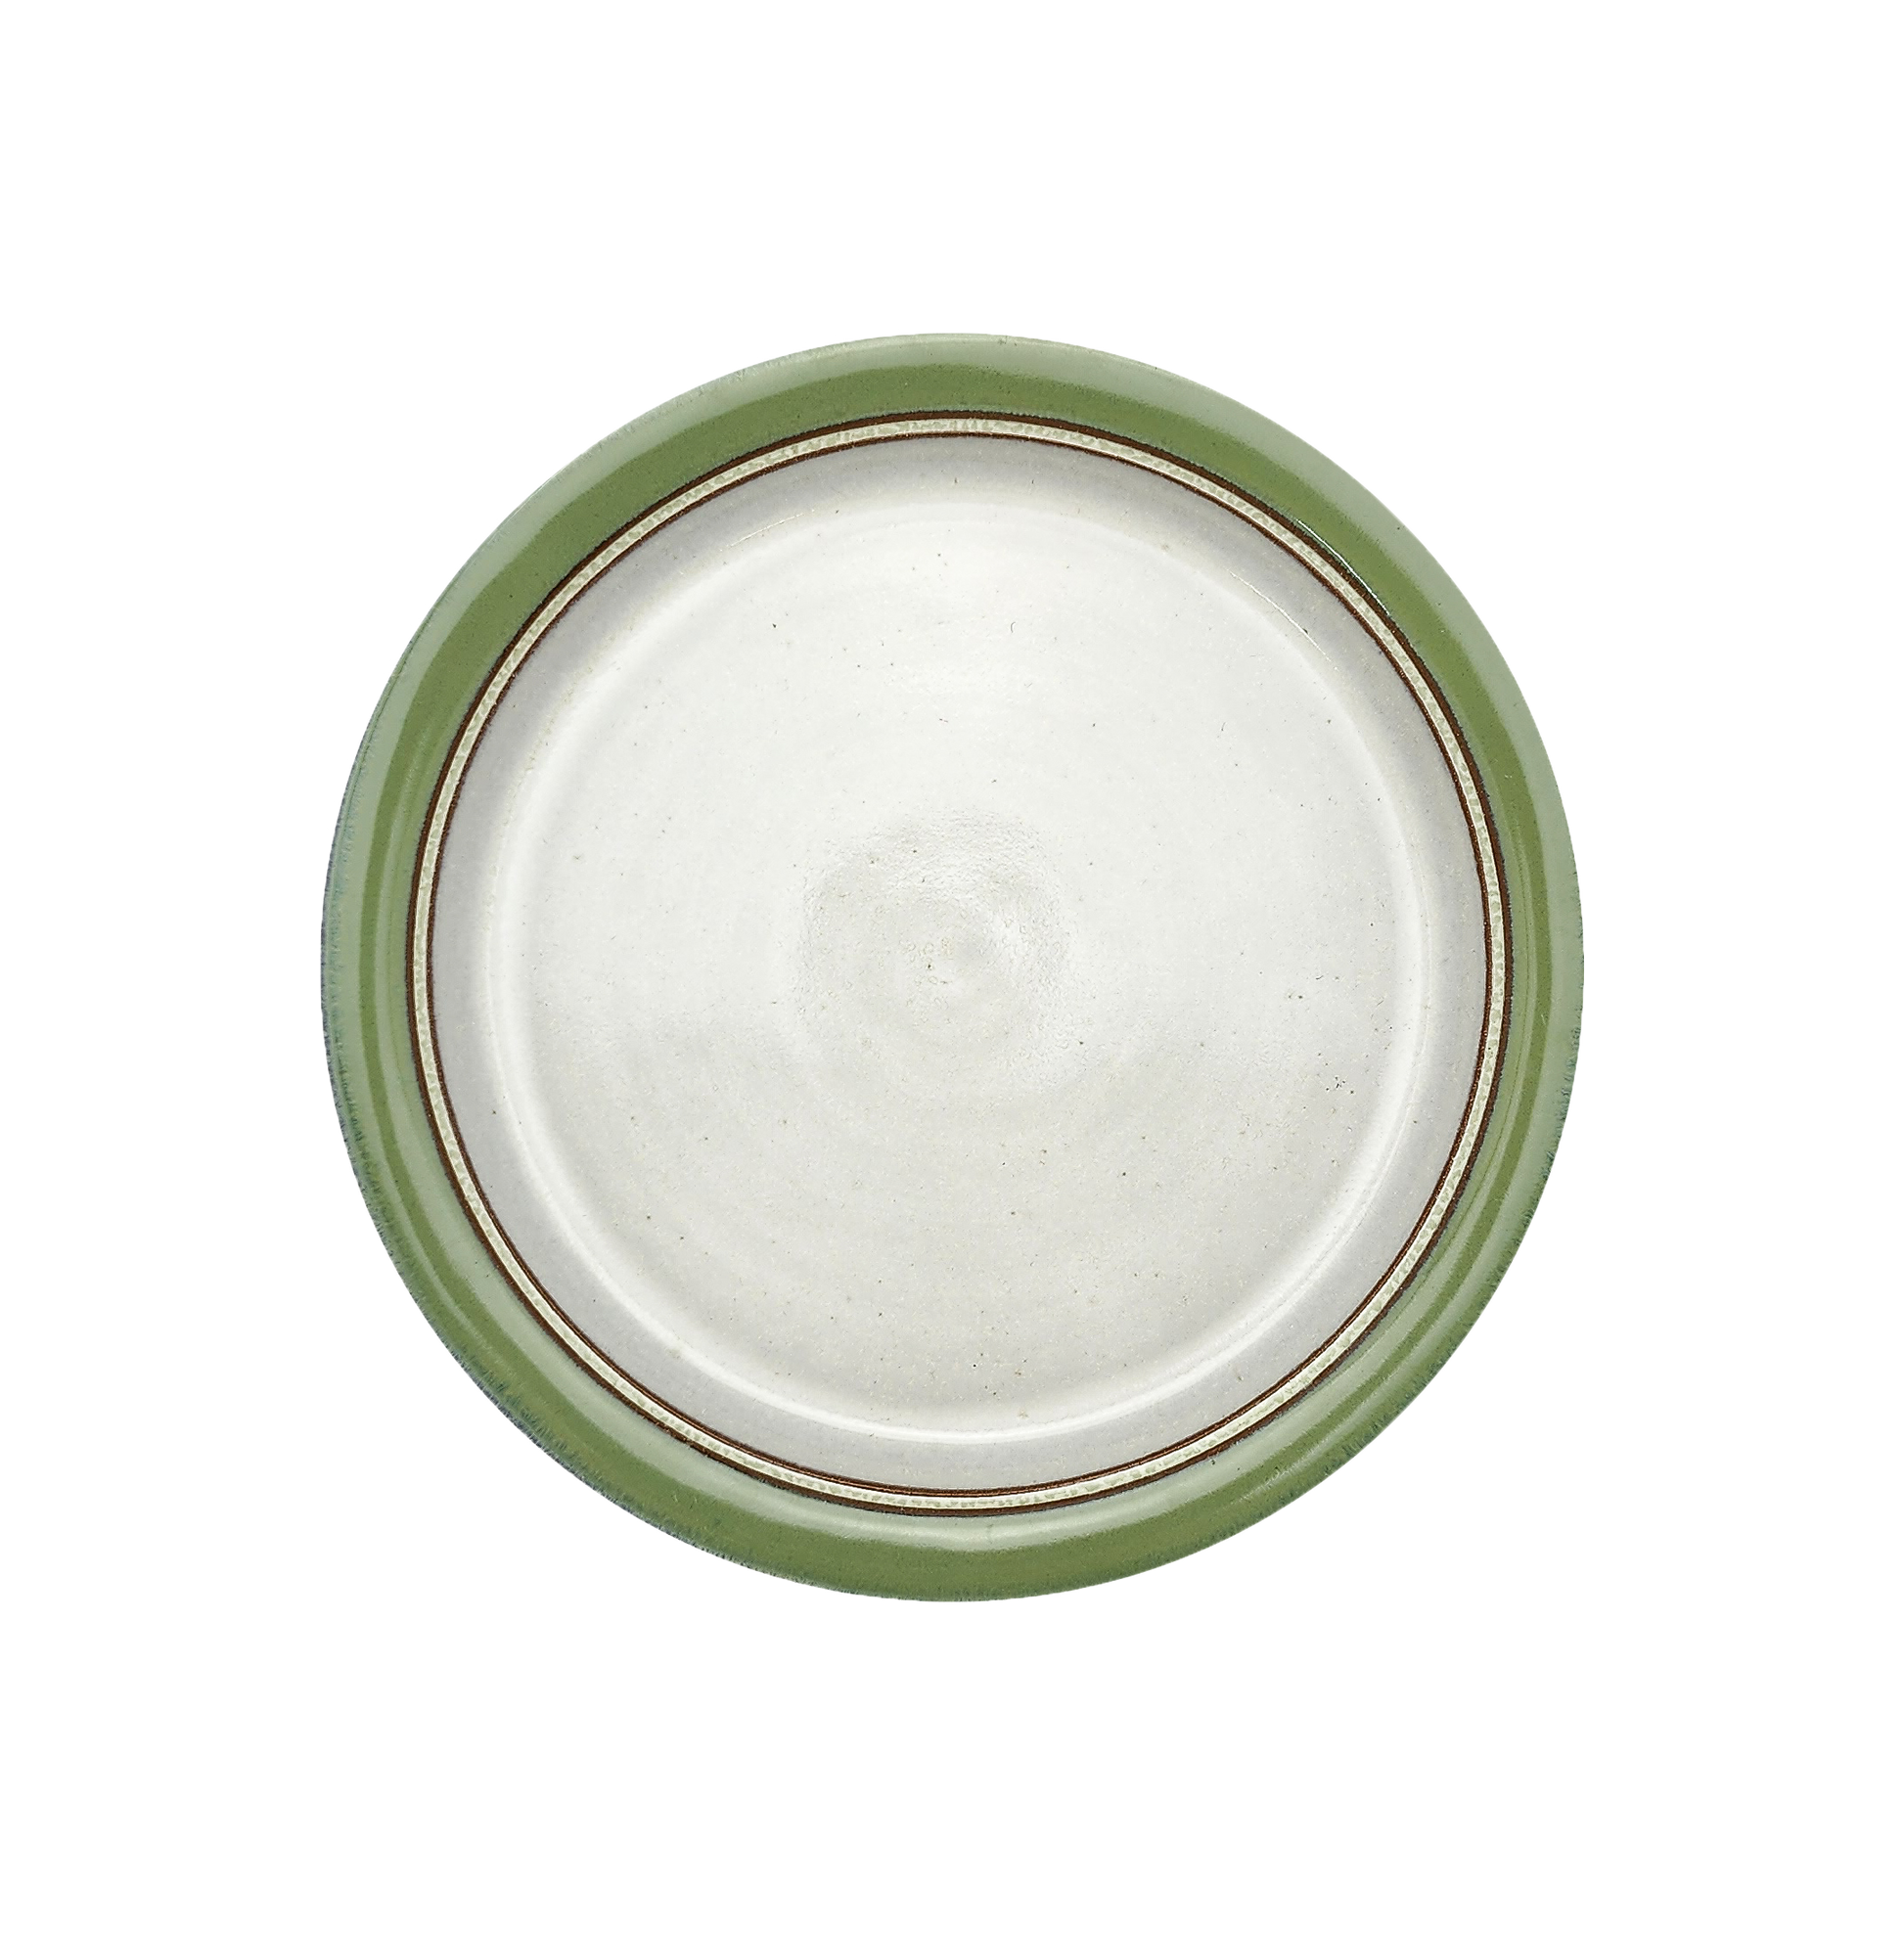 Image Description for  Dinner Plate (10") in Bud Green: A charming bud green dinner plate from Clinton Pottery's Handmade Dinnerware Collection. The 10-inch plate features a delightful green glaze, reminiscent of fresh spring foliage. Its ample size makes it an ideal choice for serving a delightful dinner with a touch of natural charm and vibrancy.